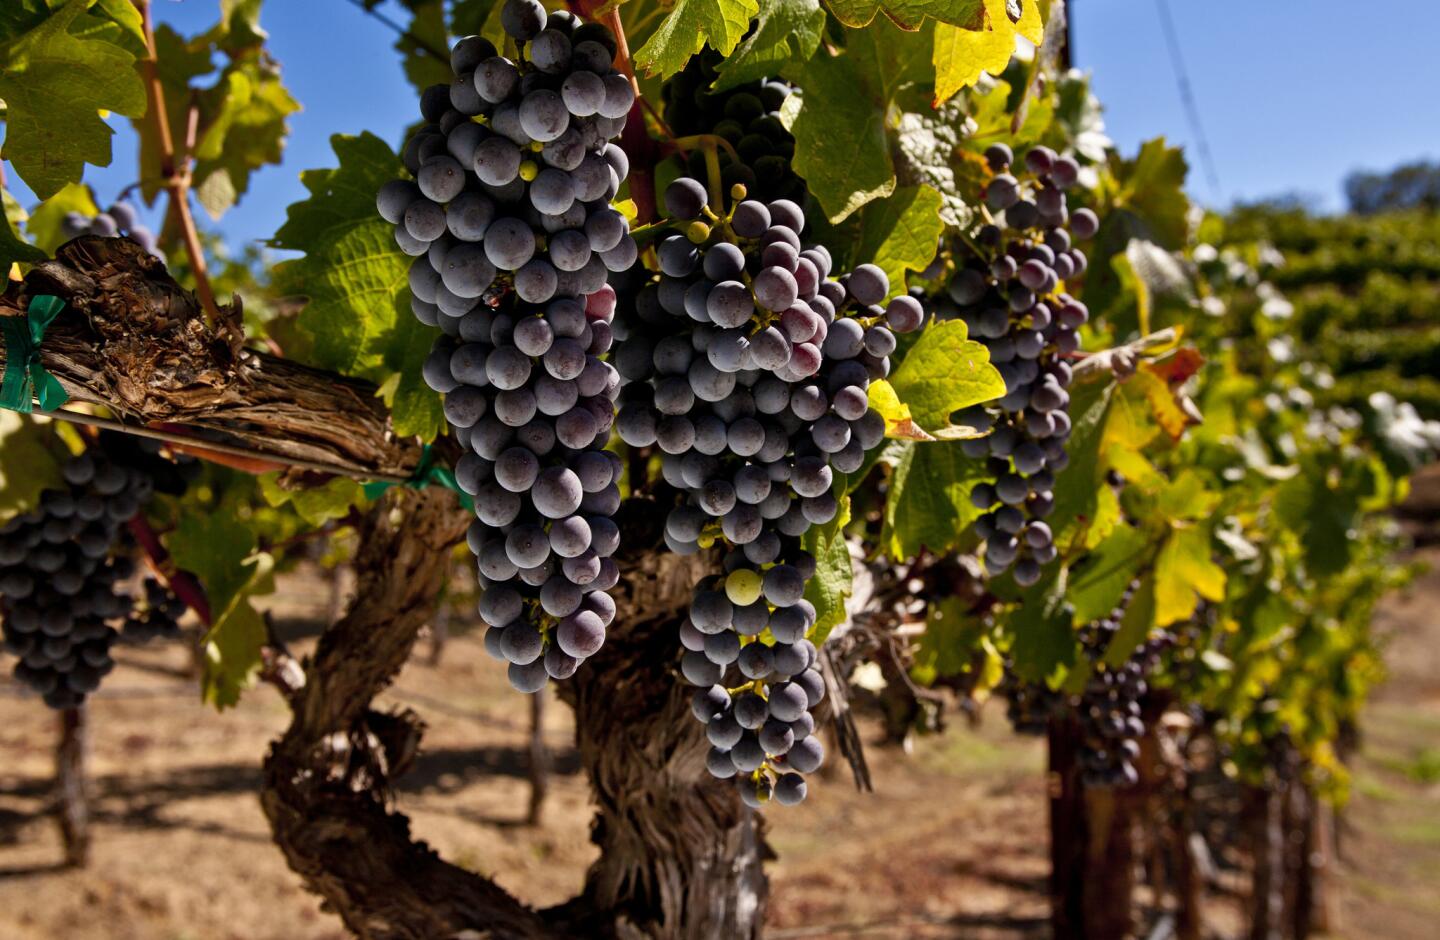 This tour allows wine lovers to take day trips from San Francisco to Sonoma and Napa Valley wineries. Admire some of California's iconic scenery, like the Golden Gate Bridge, and enjoy wine tastings, vineyard tours and shopping.